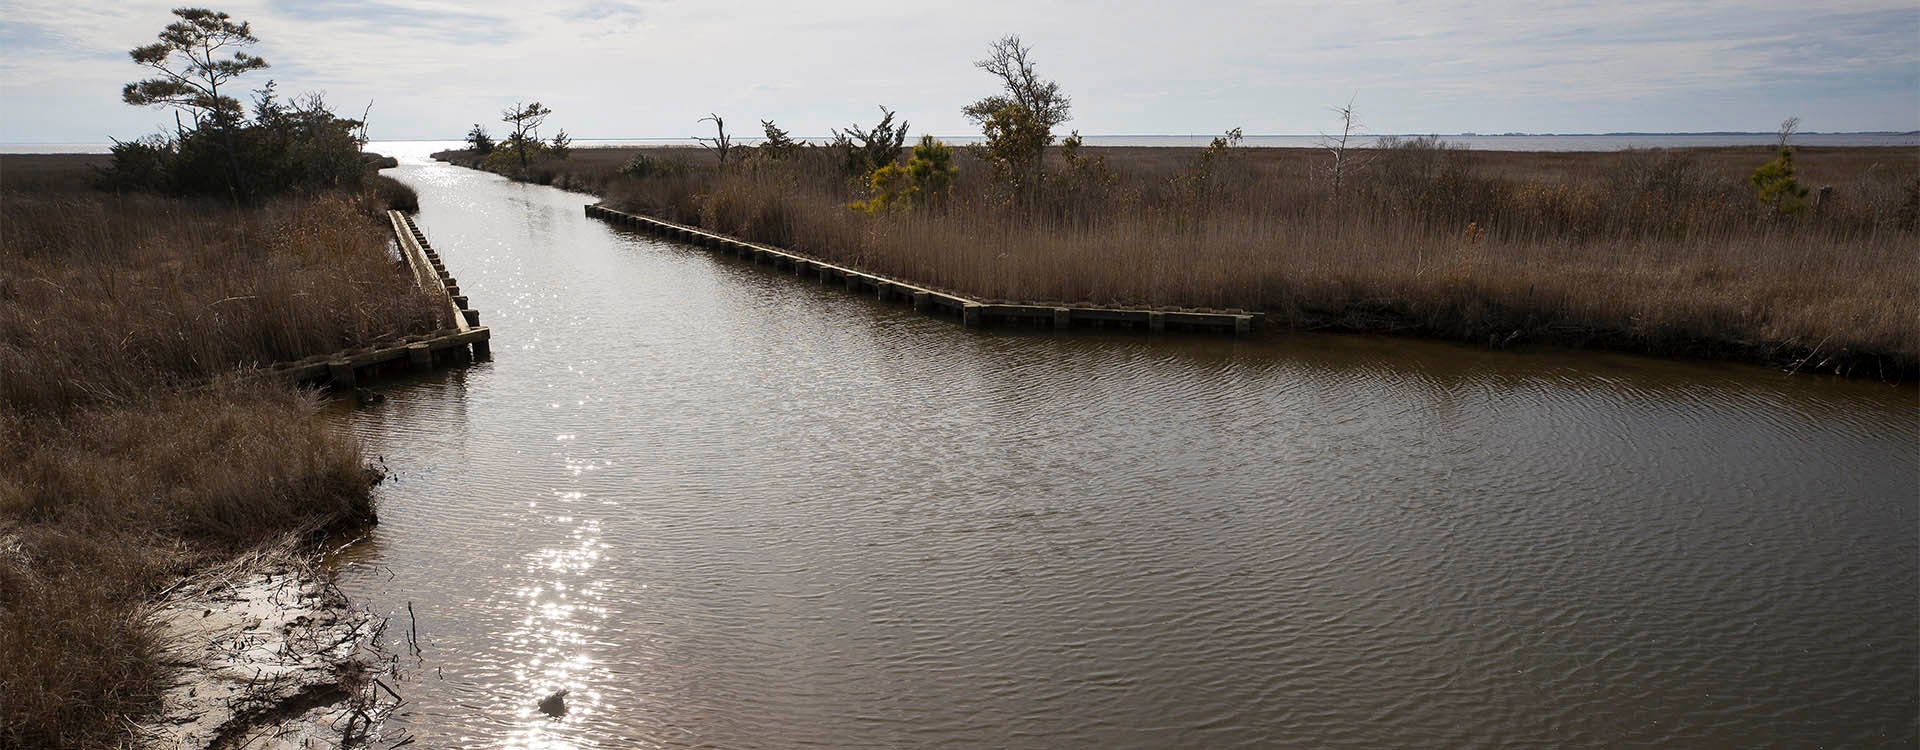 North Carolina's coastal counties will be a focus of the $1.39 million grant.